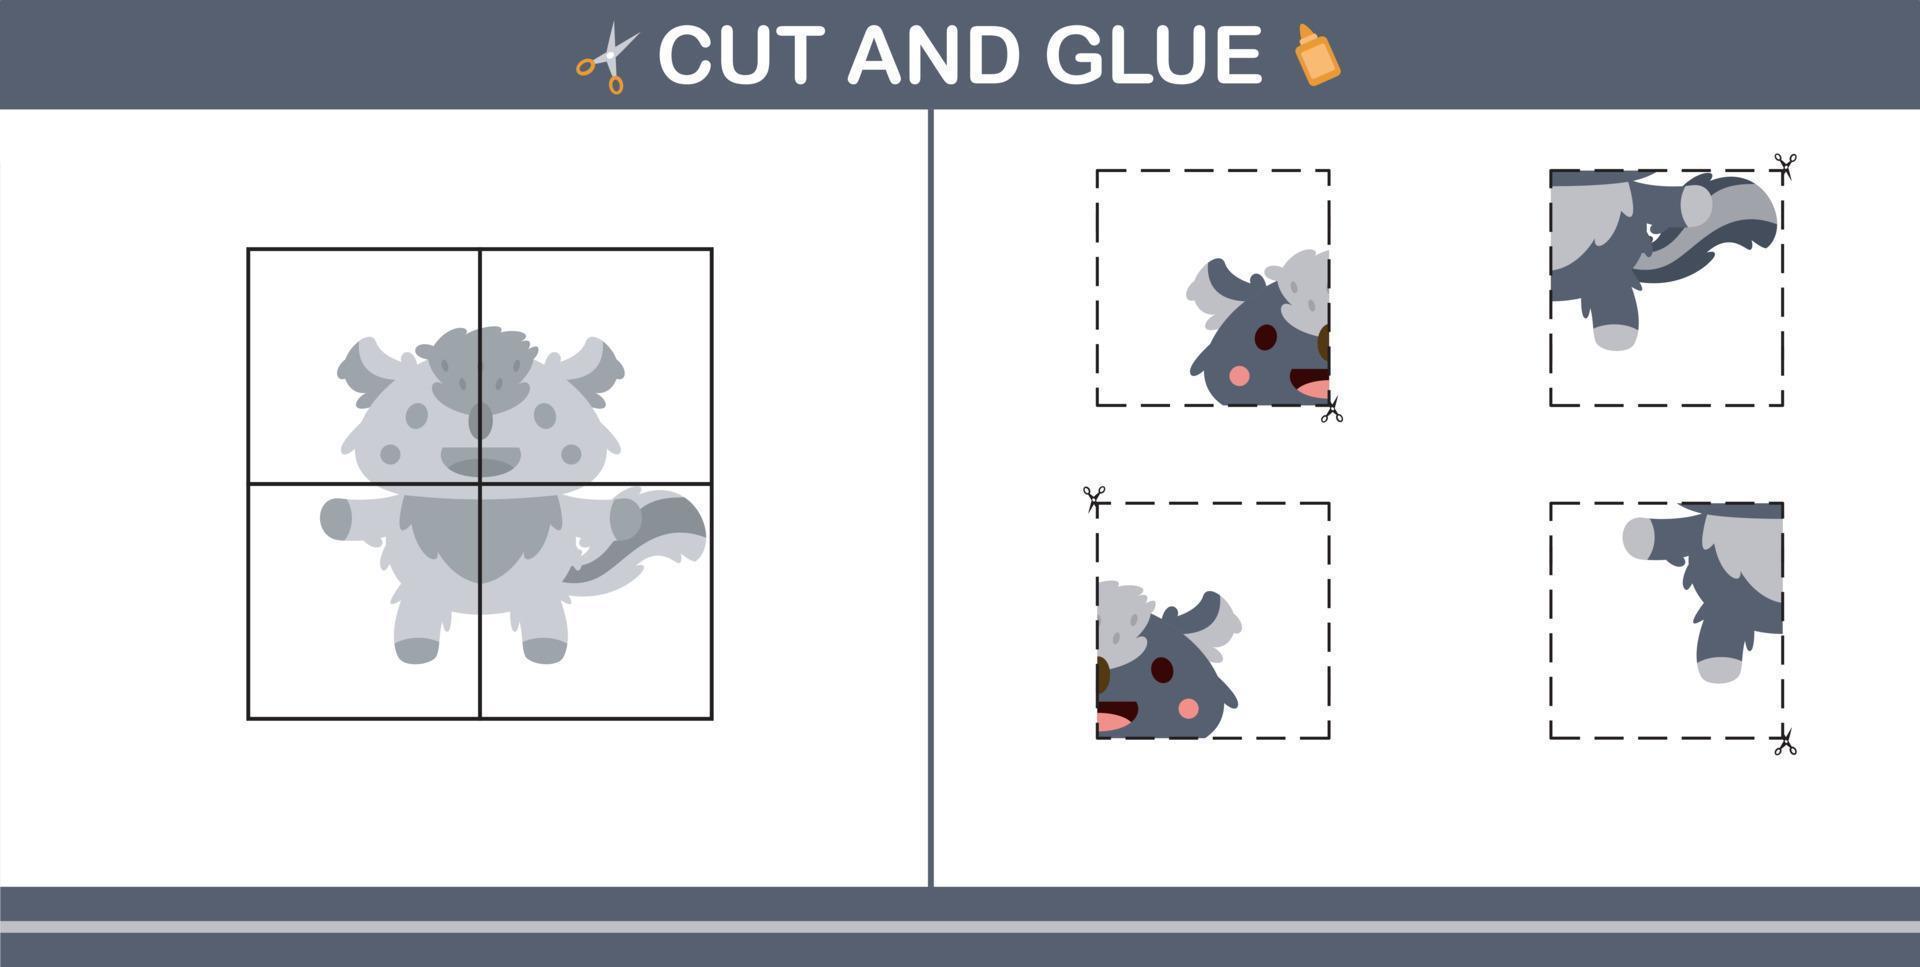 Cut and Glue of cute skunk,education game for kids age 5 and 10 Year Old vector